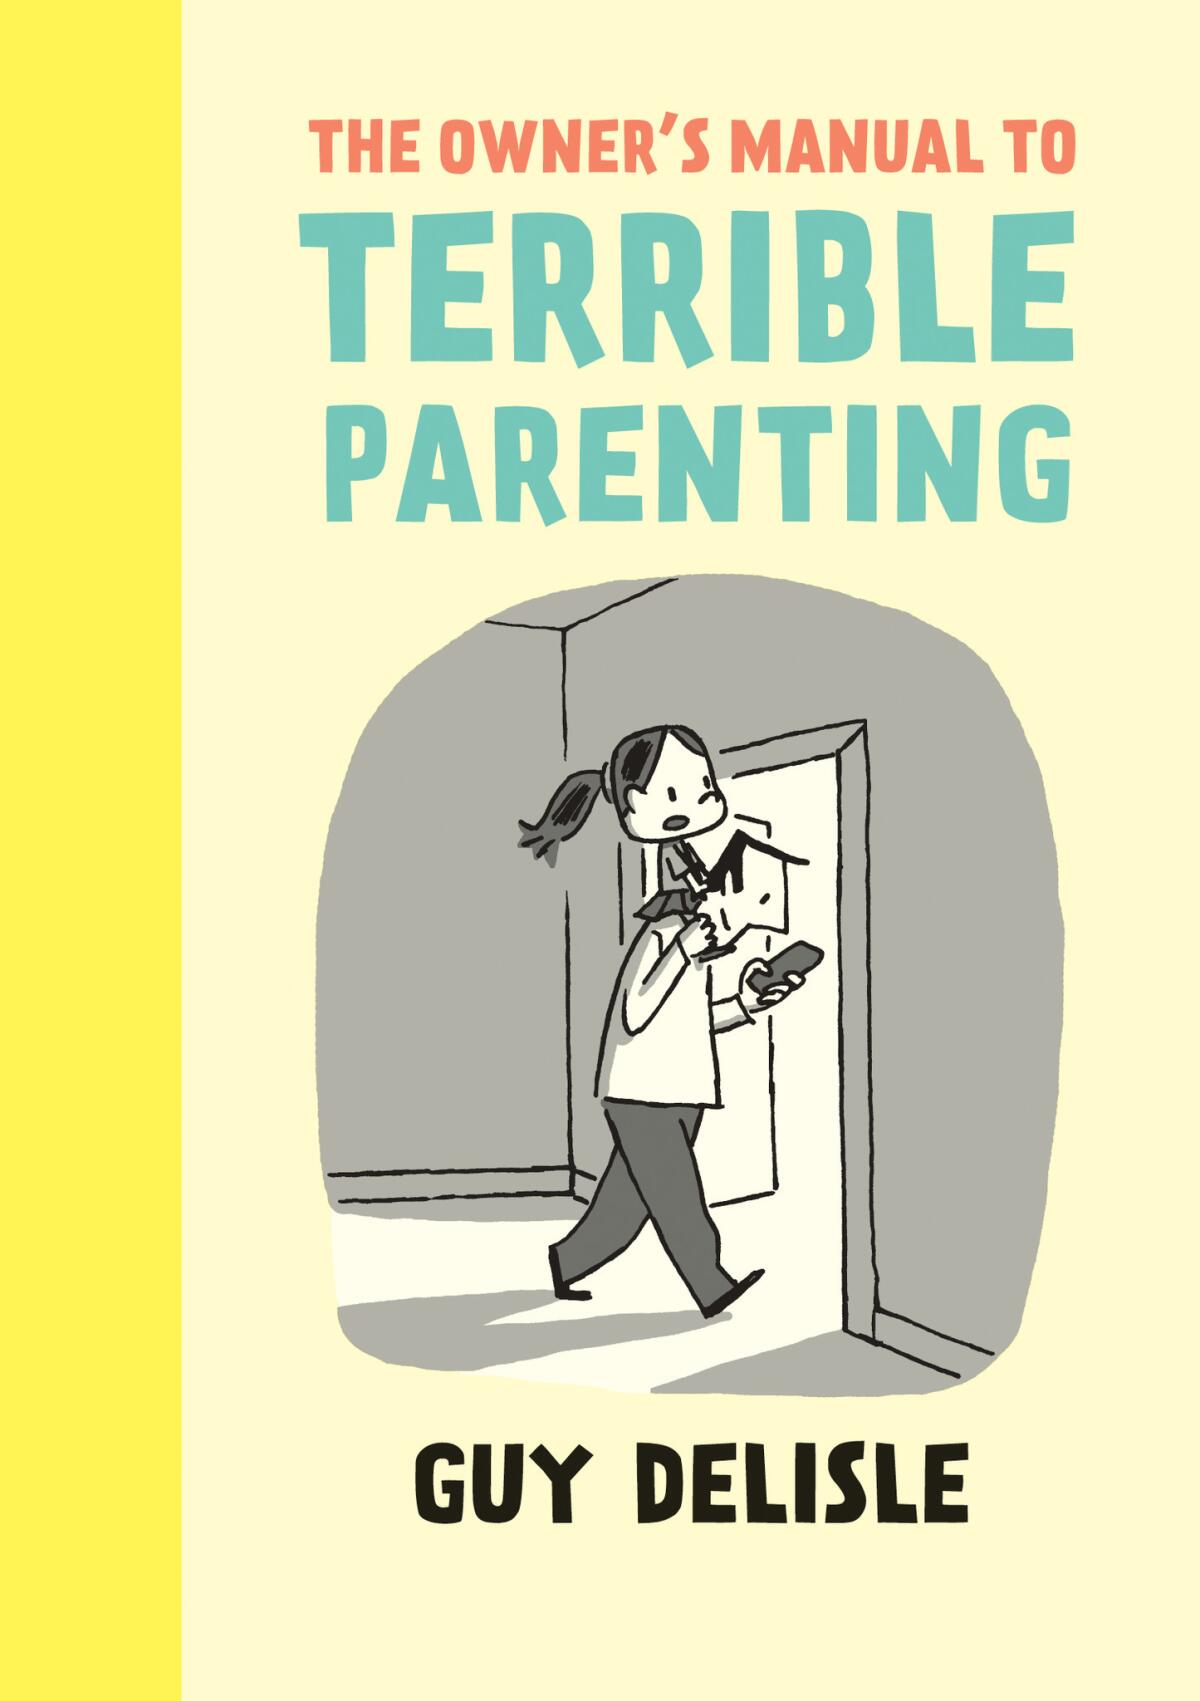 "The Owner’s Manual to Terrible Parenting" by Guy Deslile